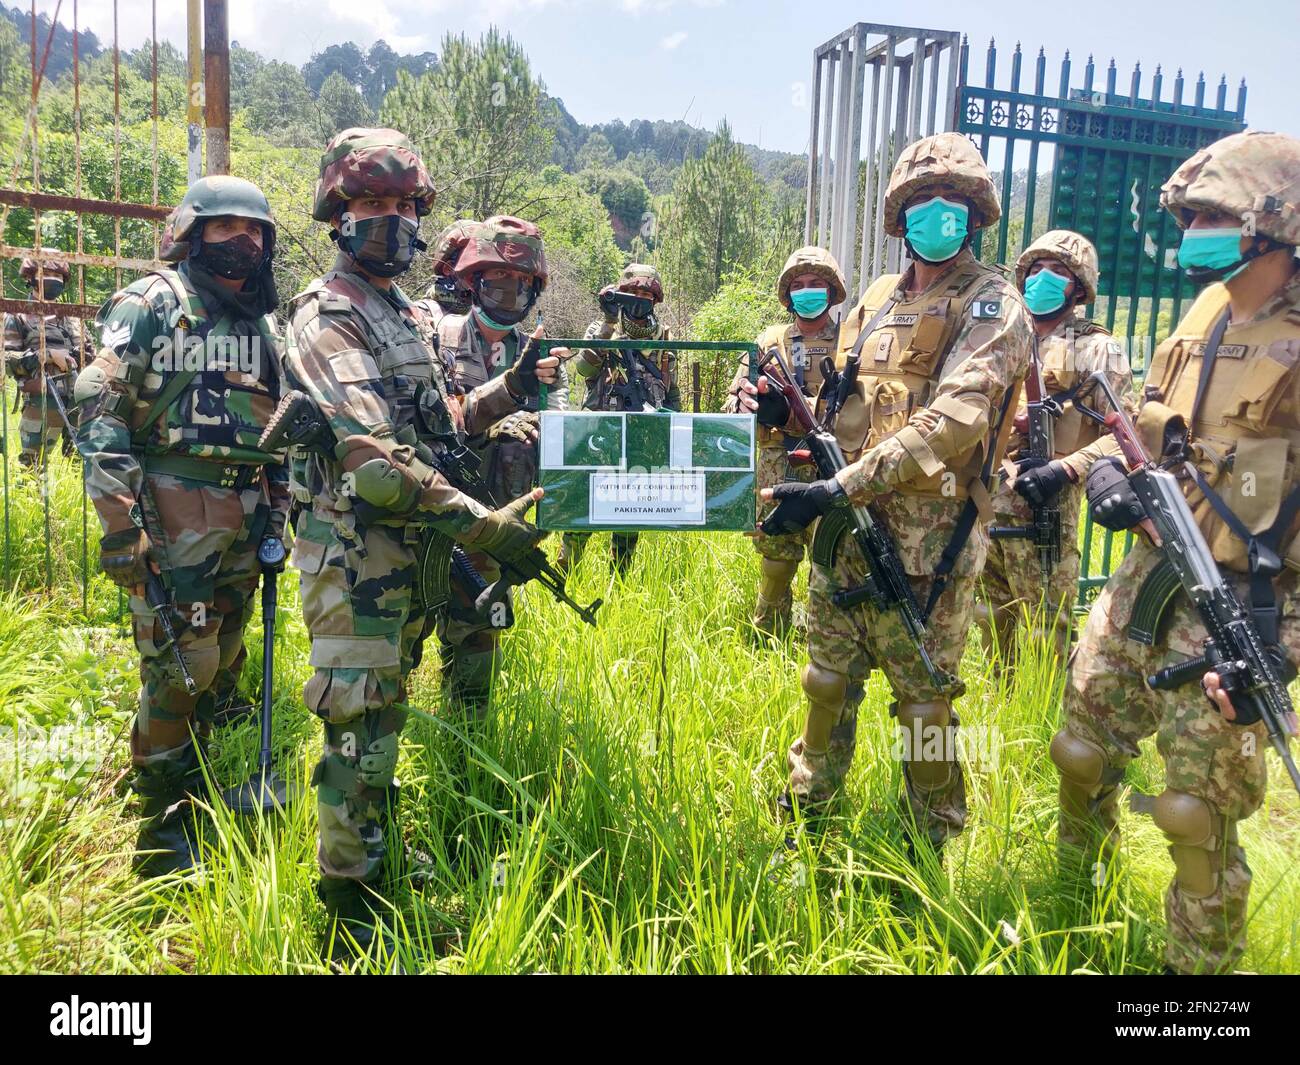 Poonch, Jammu and Kashmir, India. May 13, 2021: Indian Army & Pakistan Army celebrated Eid-ul-Fitr on the Line of Control (LoC) at Poonch-Rawalakot Crossing Point & Mendhar-Hotspring Crossing Point in Poonch district of Jammu & Kashmir on 13 May 21. Sweets and compliments were exchanged by the representatives of both the Armies in an atmosphere of bonhomie & festivities. The ceremony is seen as a confidence building measures in the backdrop of recently agreed ceasefire between both the countries. Credit: ZUMA Press, Inc./Alamy Live News Stock Photo